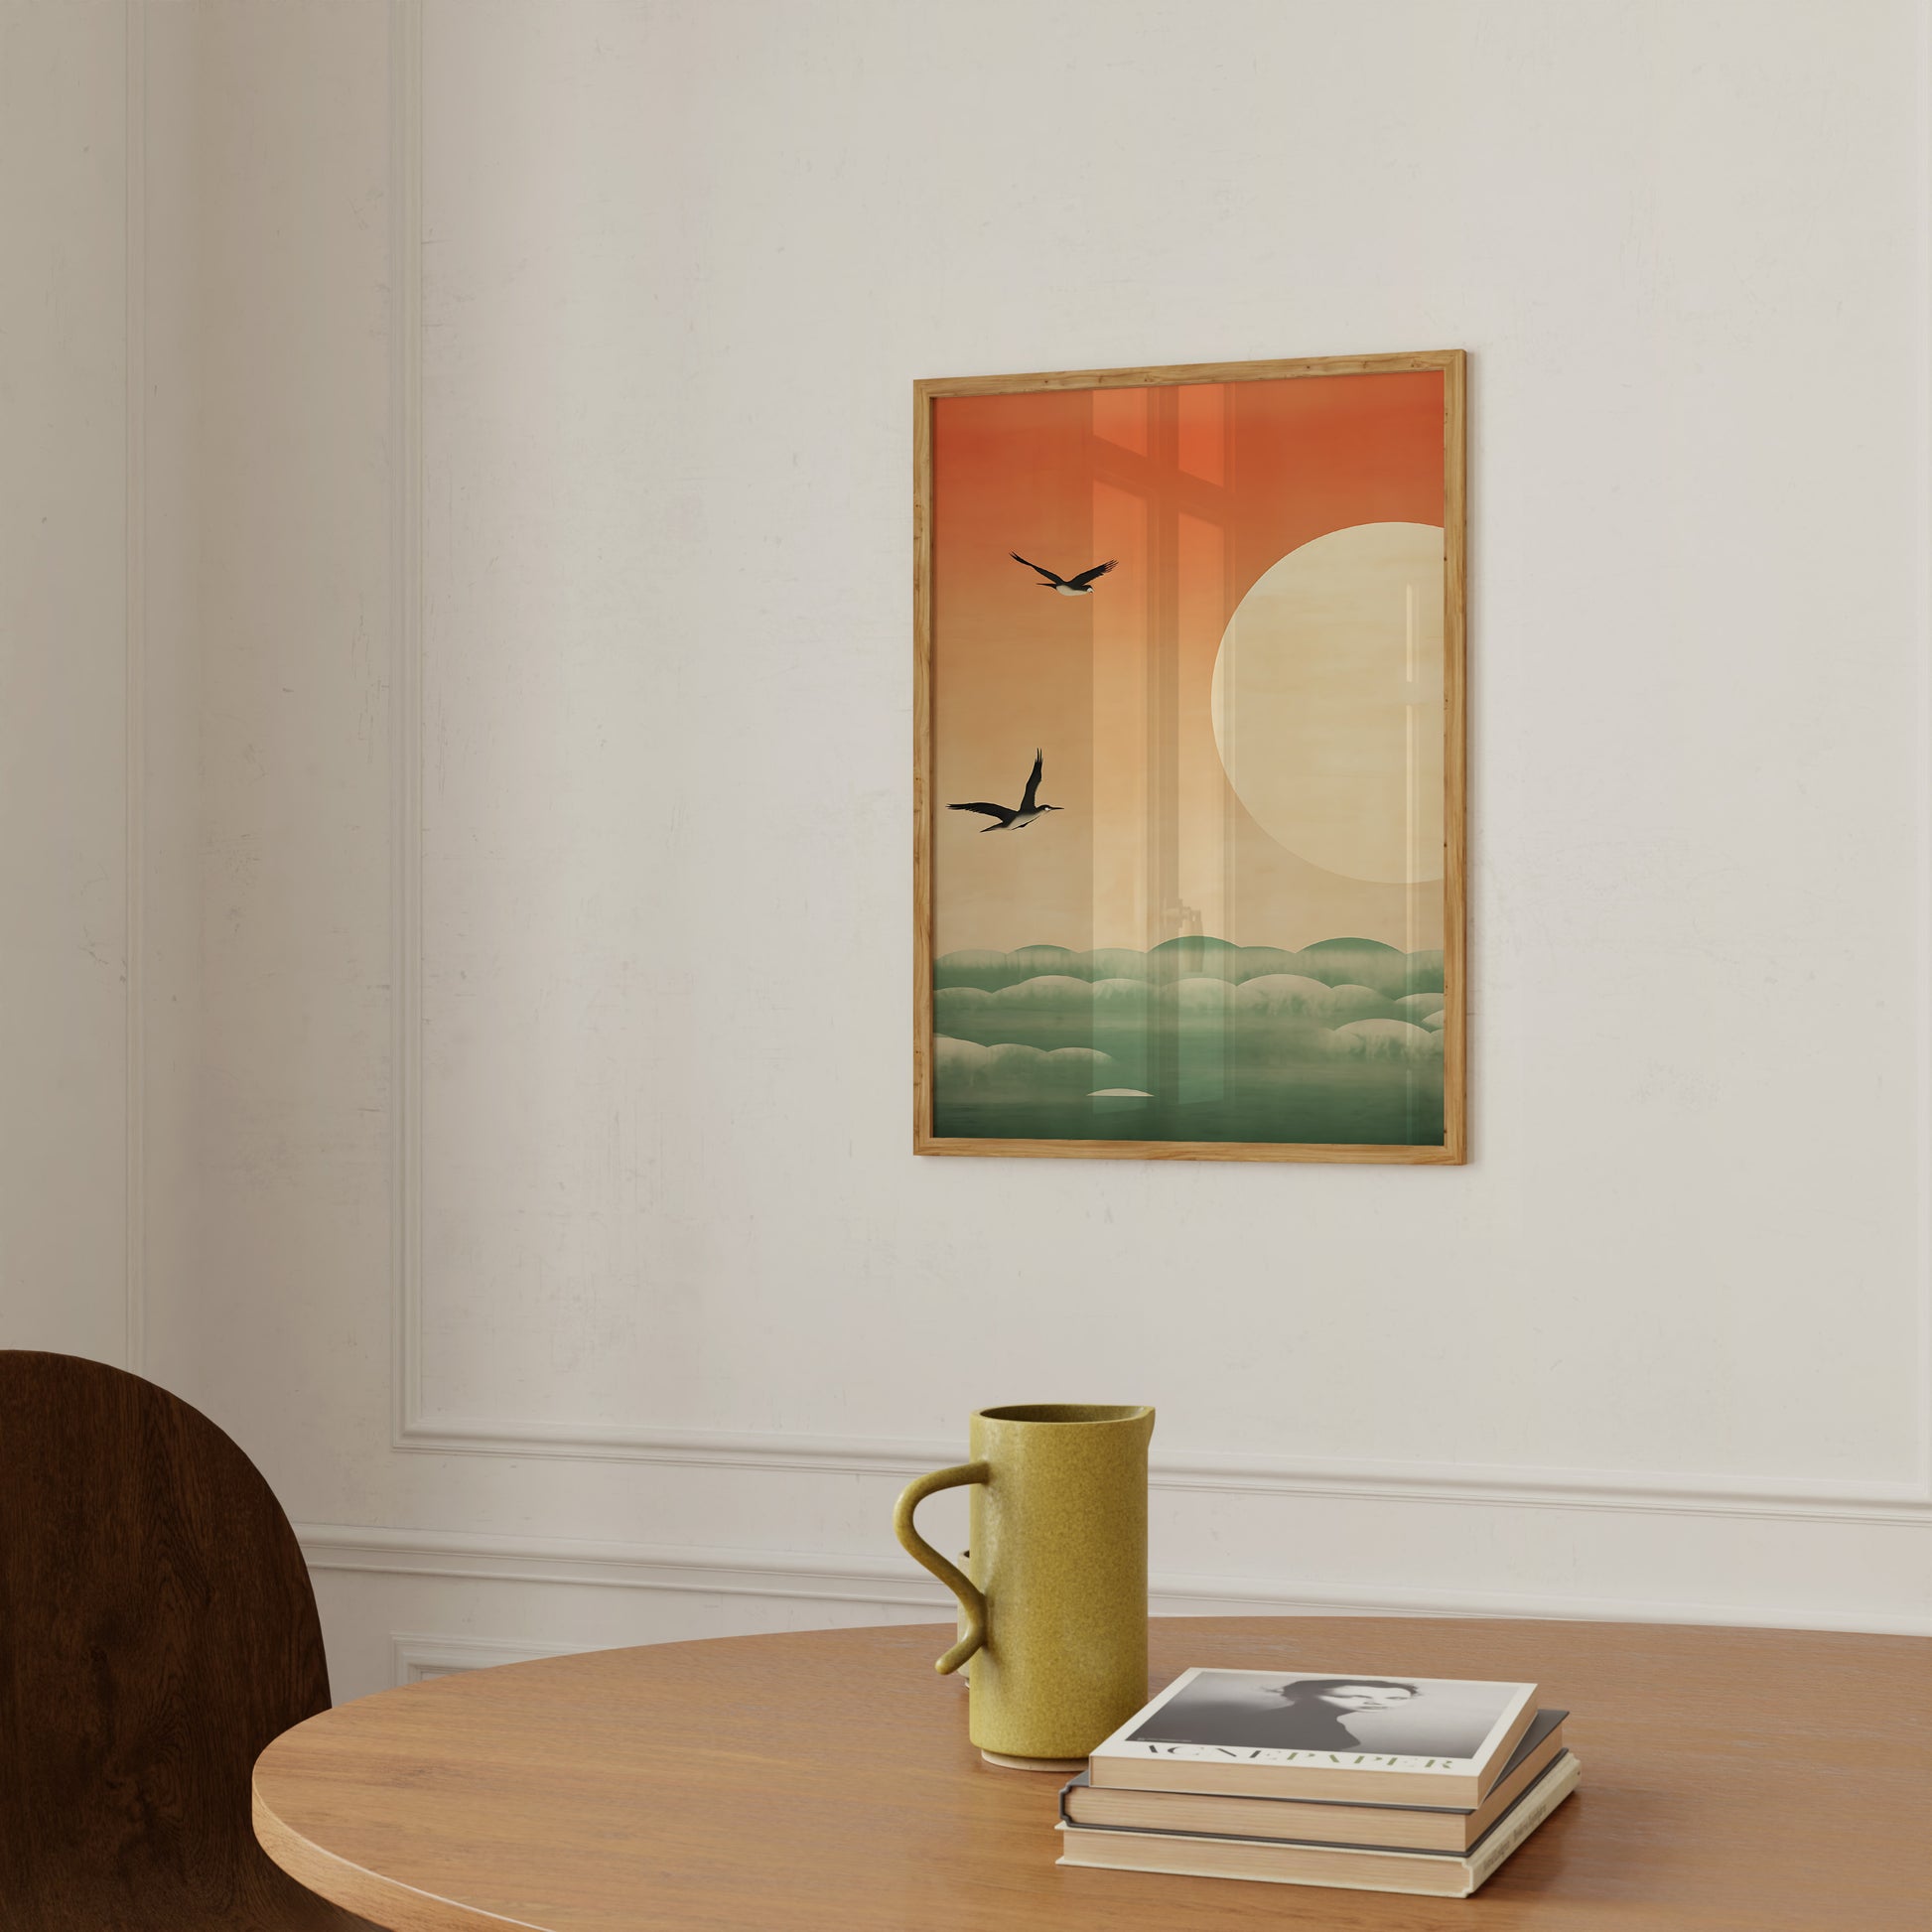 An art print featuring a sun, clouds, and birds on a wall above a table with a mug and books.